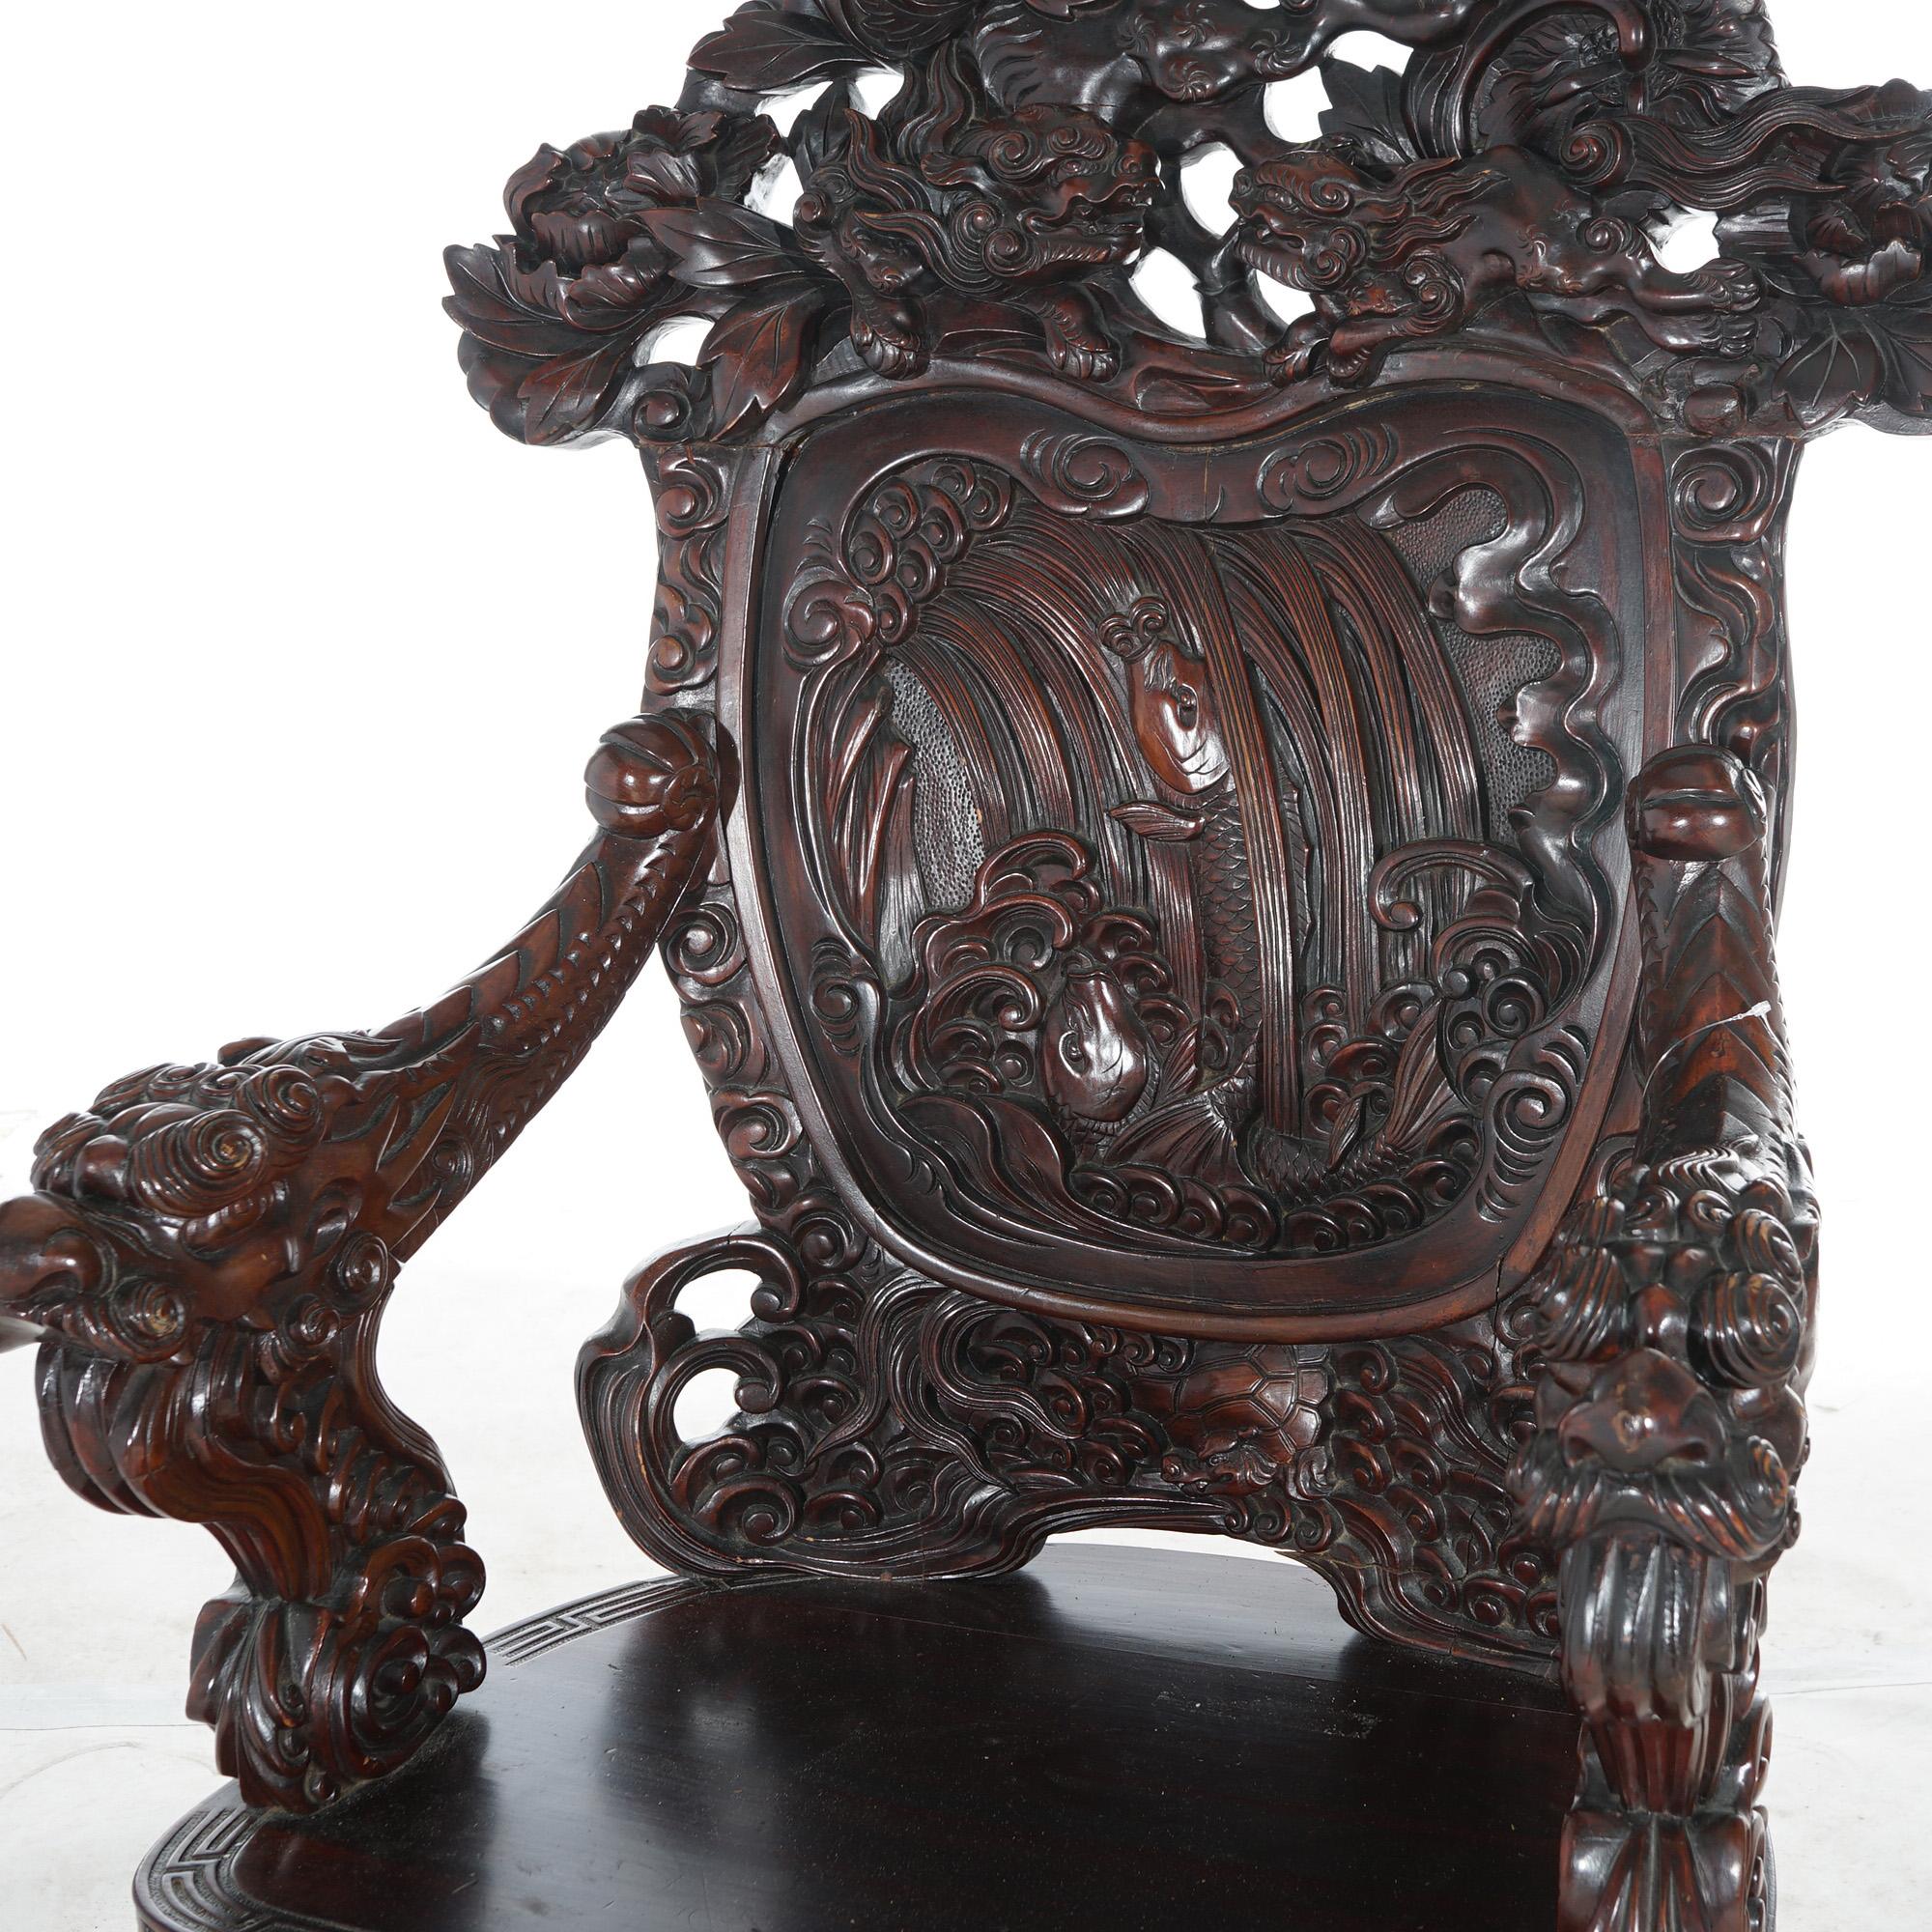 20th Century Antique Chinese Deep Carved Rosewood Figural King Throne Chair with Dragons 1920 For Sale